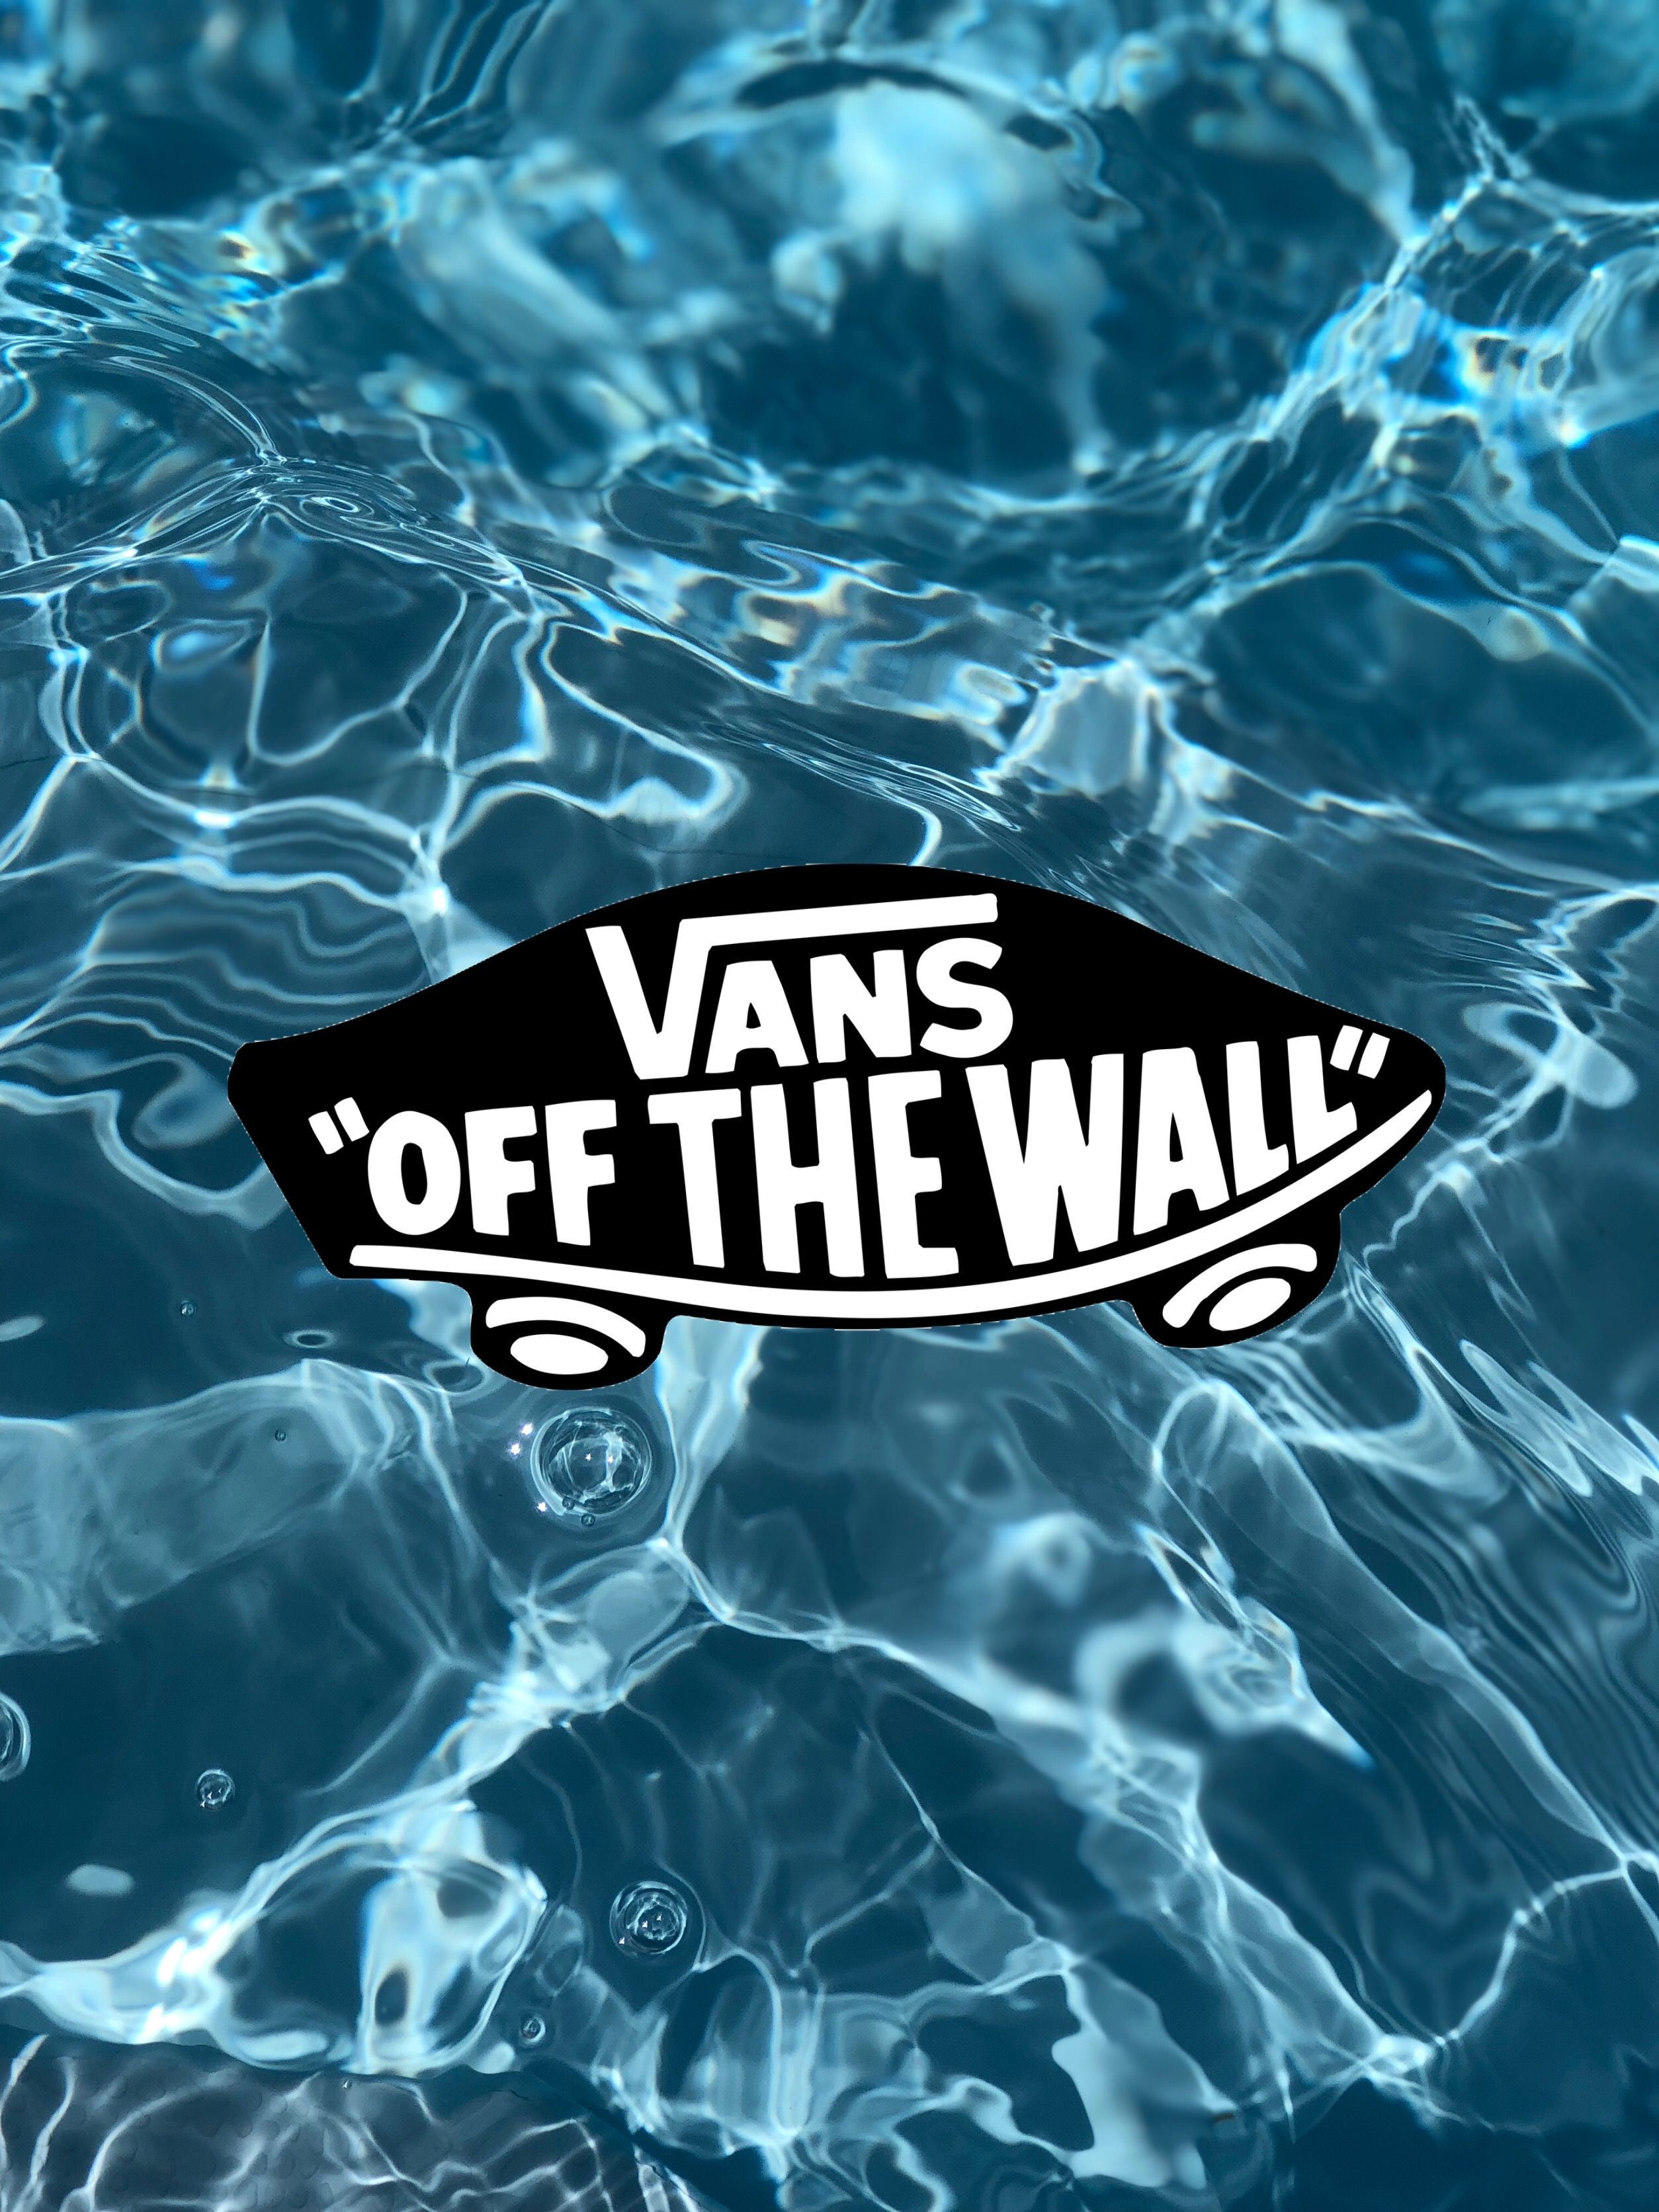 Vans Off the Wall Wallpaper Free Vans Off the Wall